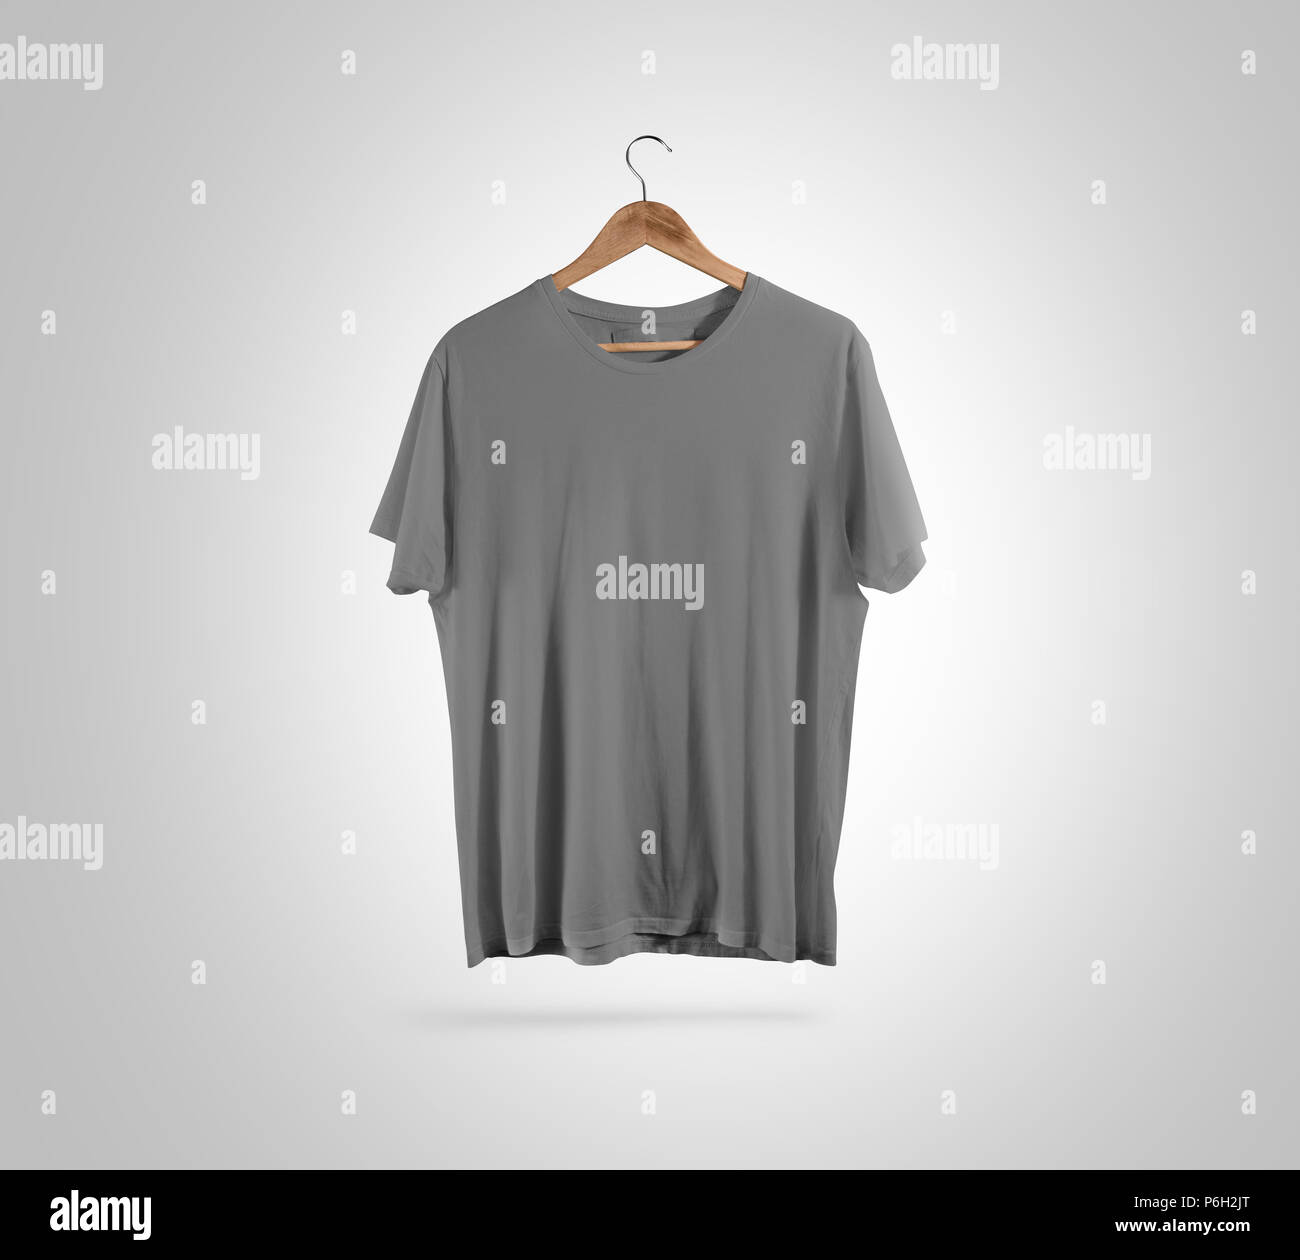 https://c8.alamy.com/comp/P6H2JT/blank-grey-t-shirt-front-side-view-on-hanger-design-mockup-clipping-path-gray-clear-plain-cotton-tshirt-mock-up-template-apparel-store-logo-branding-display-crew-shirt-surface-hang-on-wood-hanger-P6H2JT.jpg